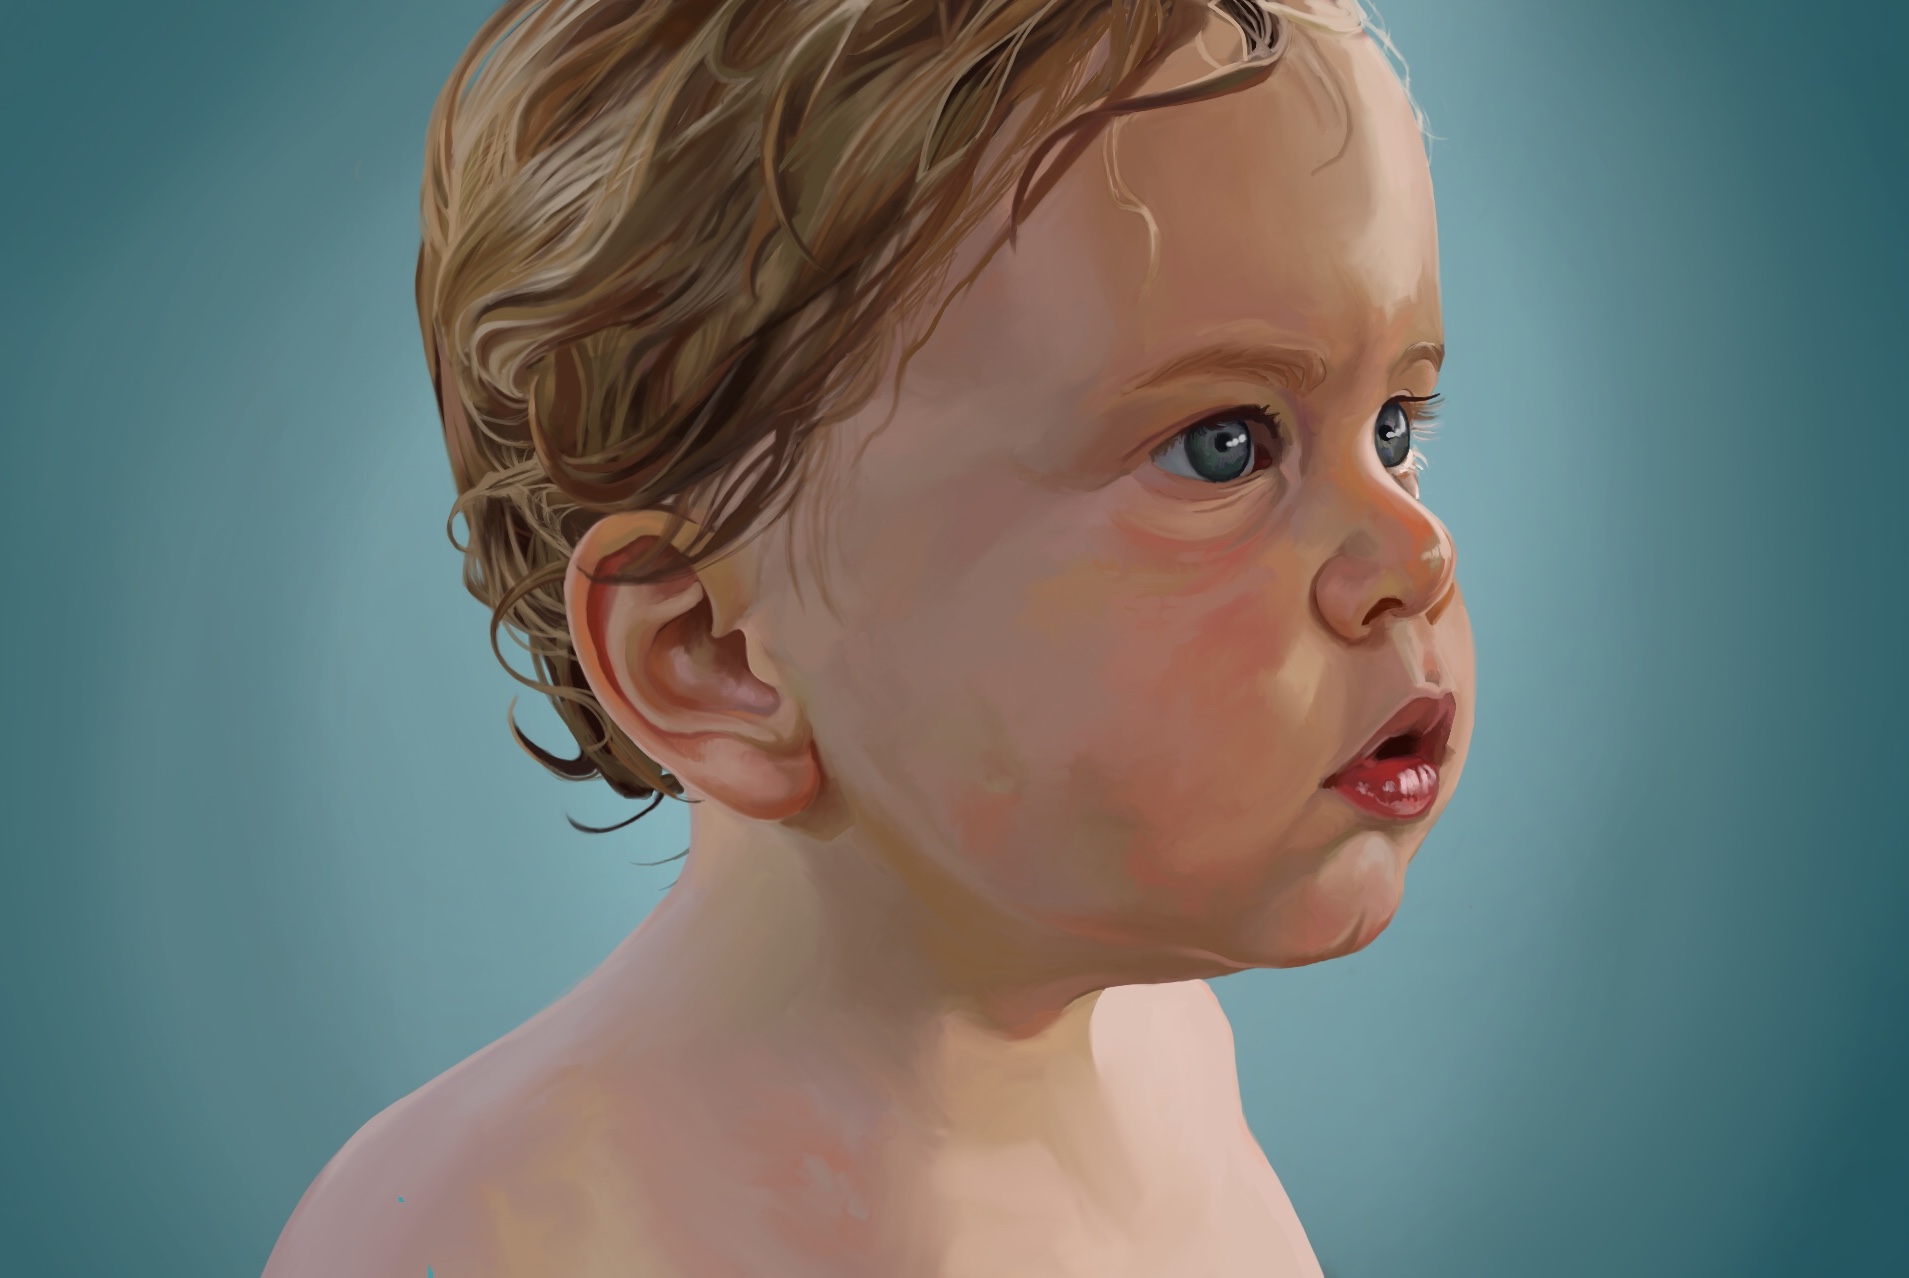 a digital painting of a baby with big, blue eyes, looking into the distance